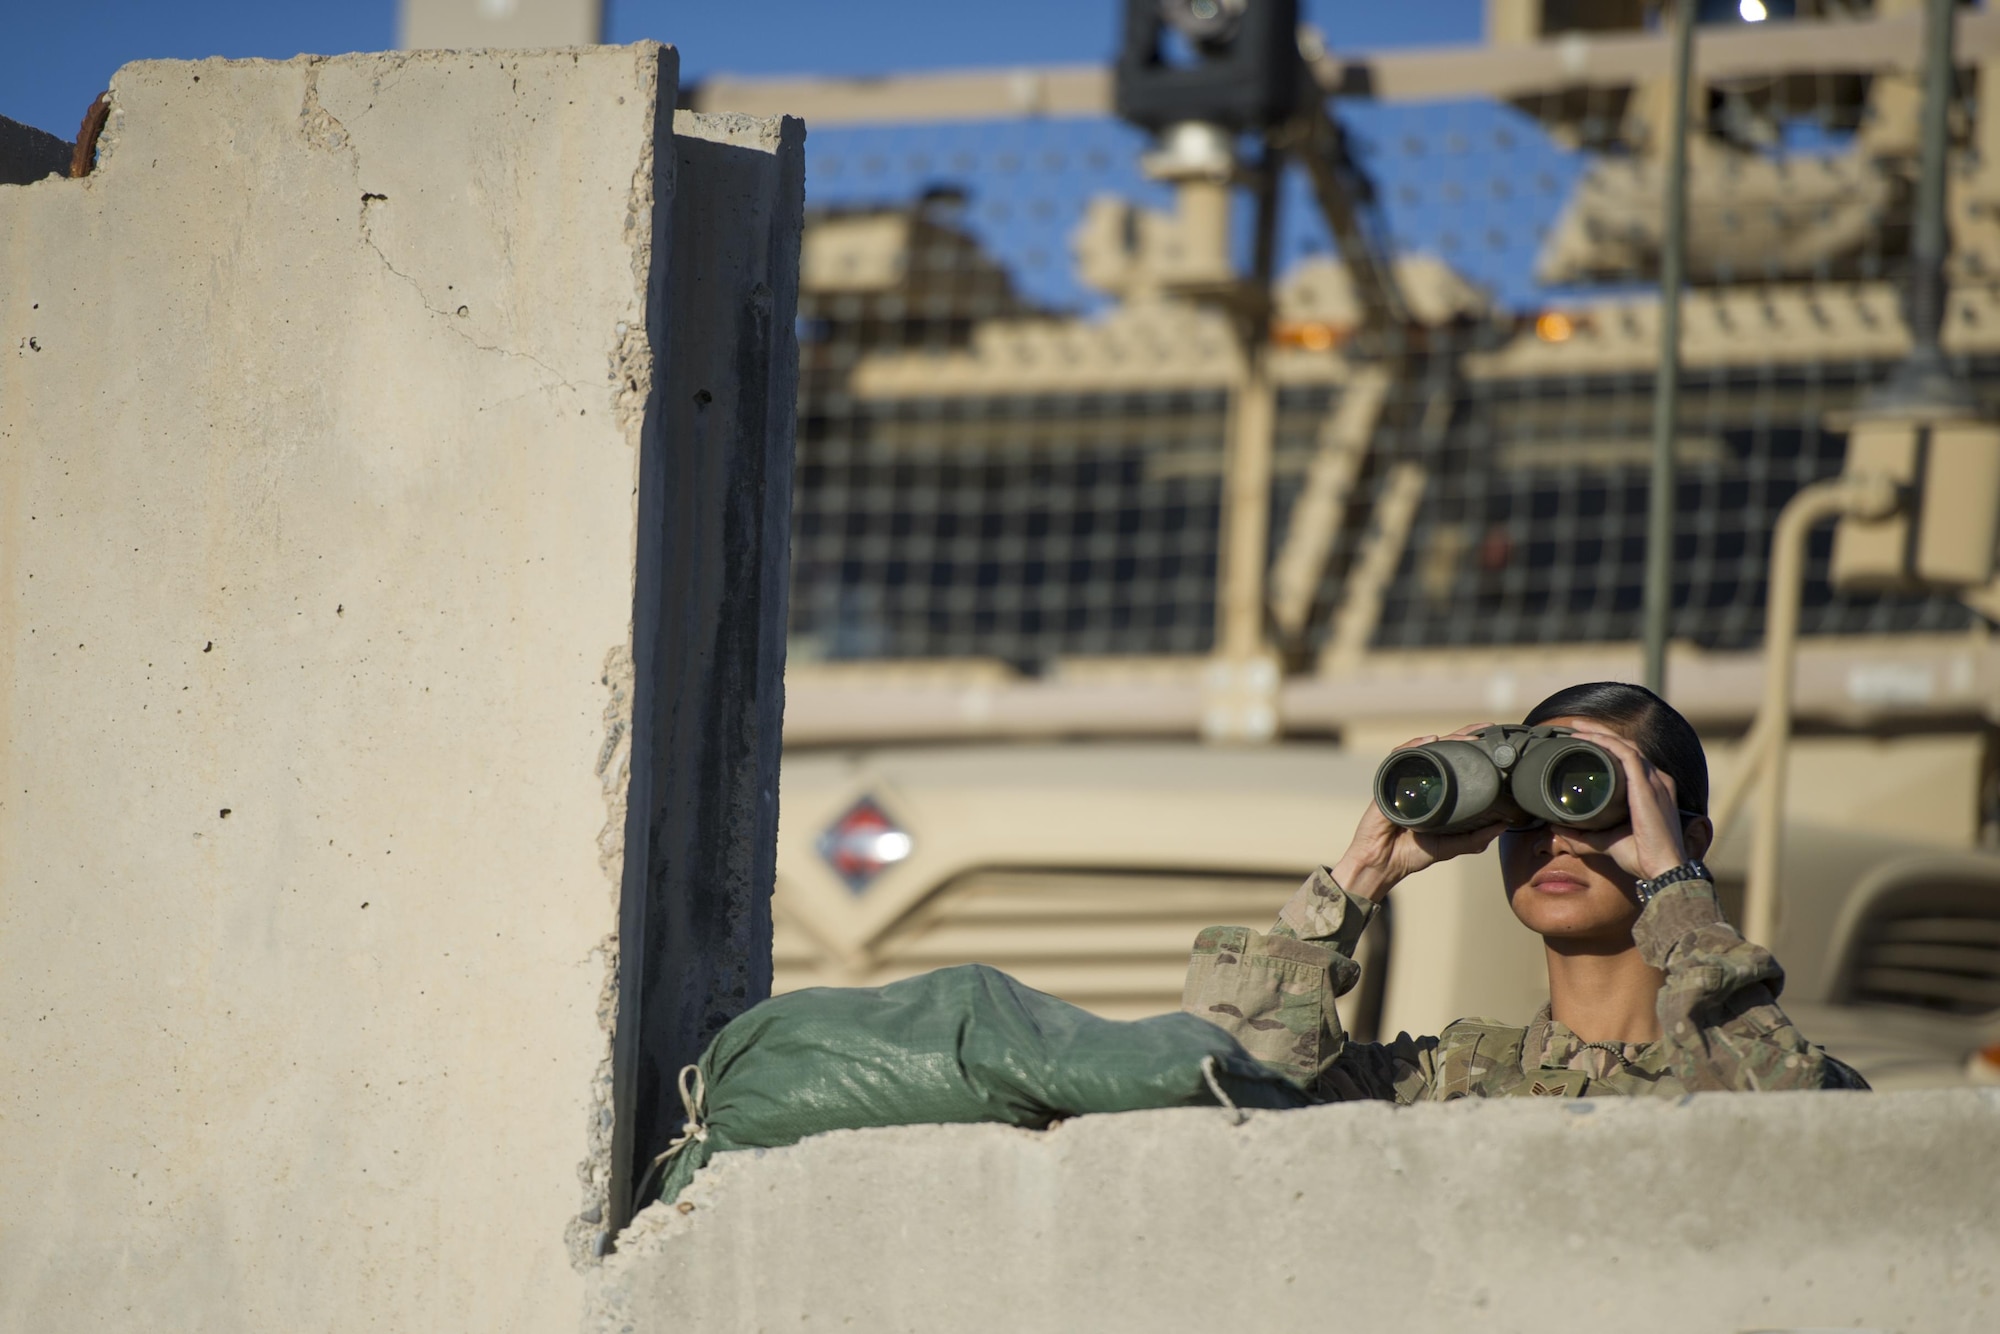 Senior Airman Winchell Austria, of the 451st Expeditionary Support Squadron’s Security Forces Flight, scans a sector with binoculars at Delta-1 Post on Kandahar Airfield, Afghanistan, Jan. 20, 2016. The post provides flightline security and overwatch for convoys returning from missions outside the wire in conjunction with security positions held by additional NATO forces. (U.S. Air Force photo/Tech. Sgt. Robert Cloys)